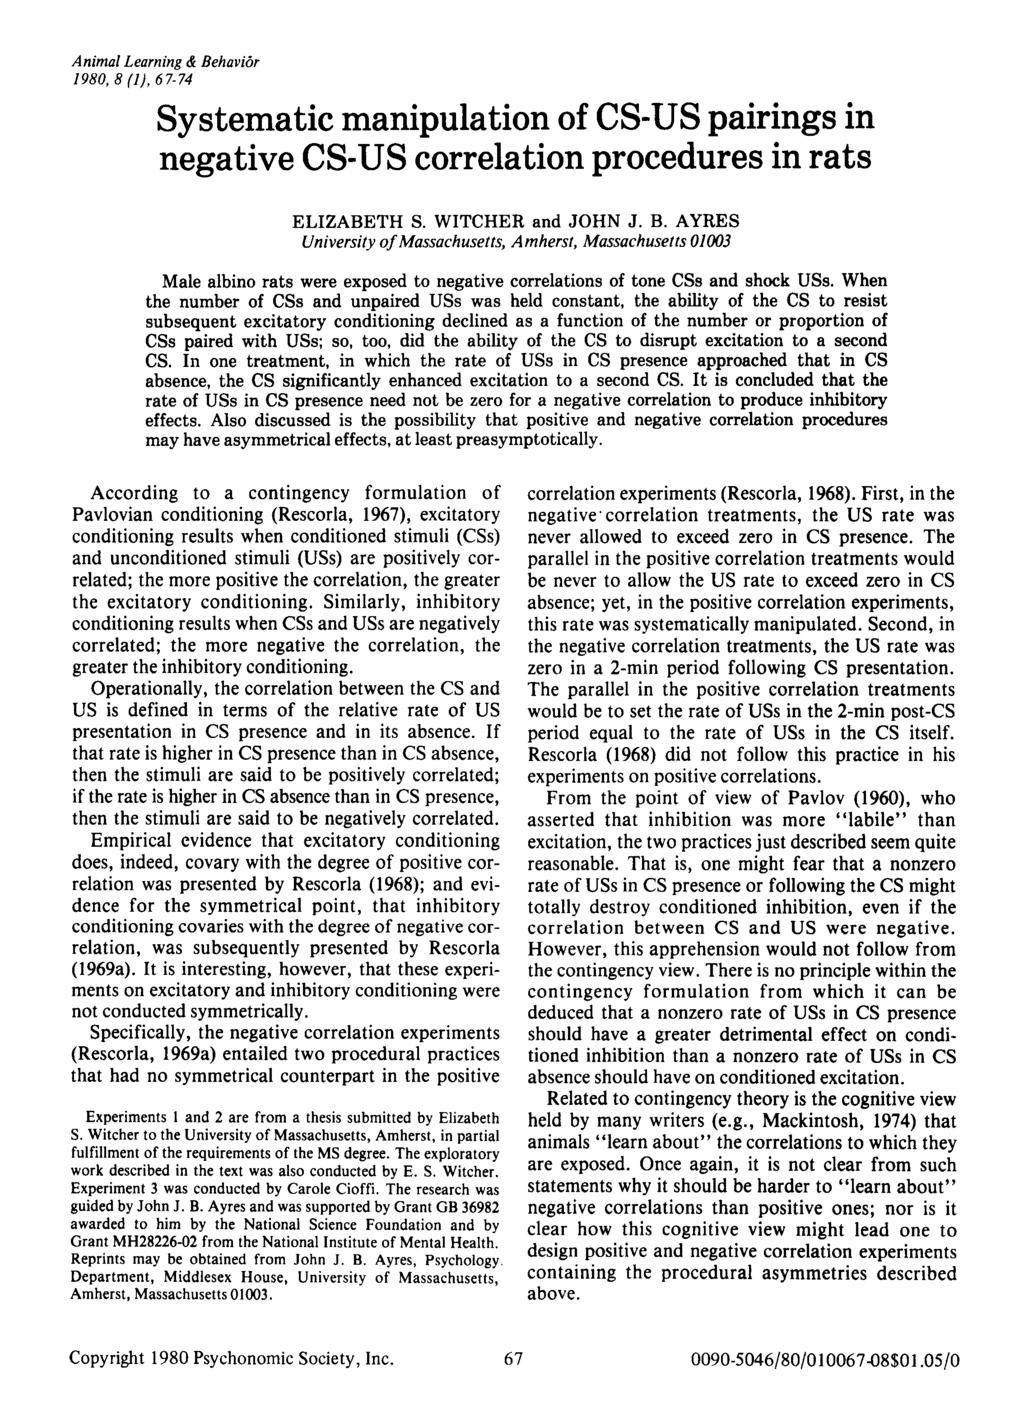 Animal Learning & Behavior 1980, 8 (1), 67-74 Systematic manipulation of CS-US pairings in negative CS-US correlation procedures in rats ELIZABETH S. WITCHER and JOHN J. B. AYRES University ofmassachusetts, Amherst, Massachusetts 01003 Male albino rats were exposed to negative correlations of tone CSs and shock USs.